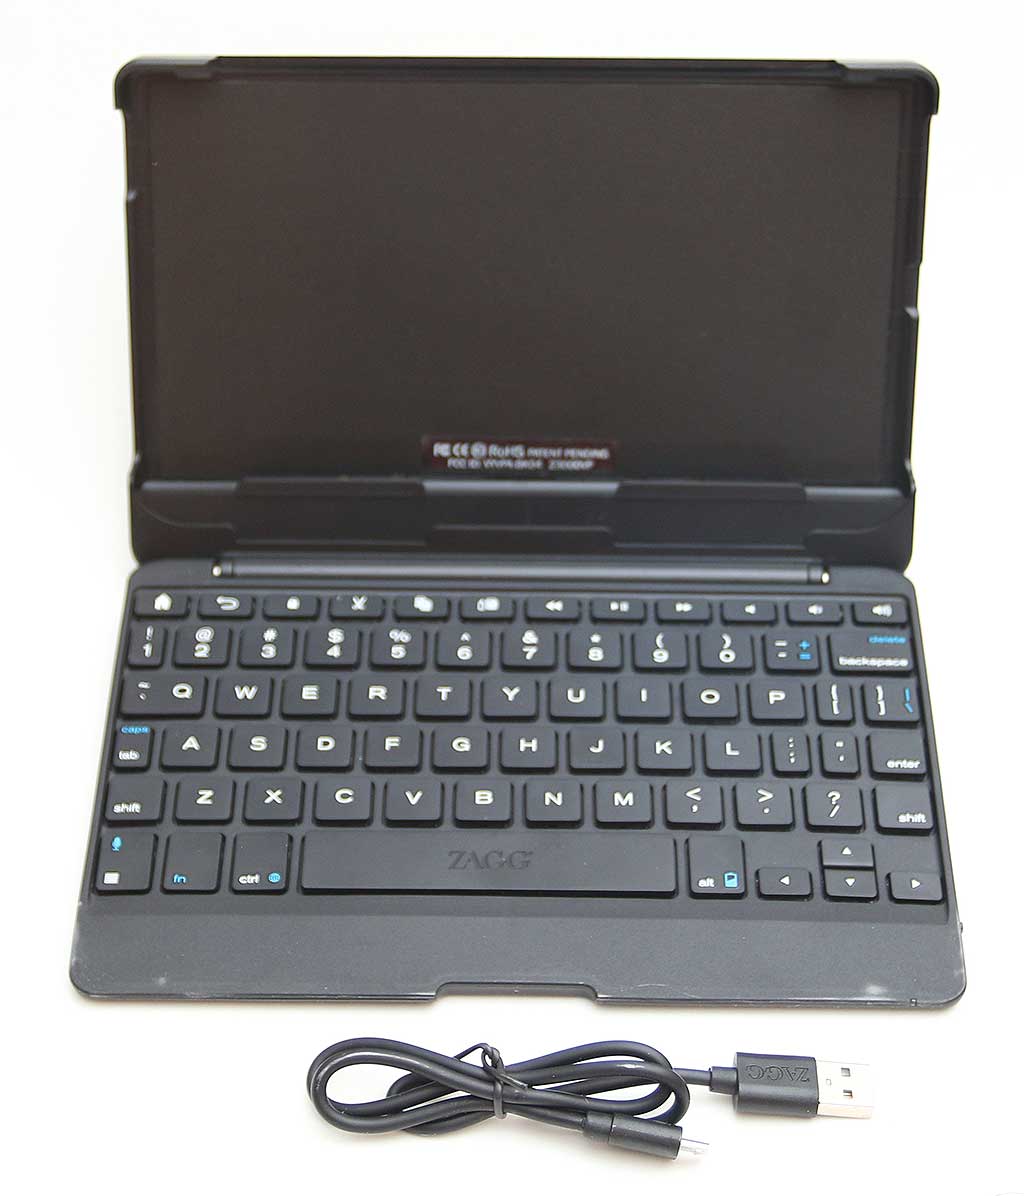 ZAGG Auto-fit Bluetooth Keyboard for 7 inch tablets review – The Gadgeteer